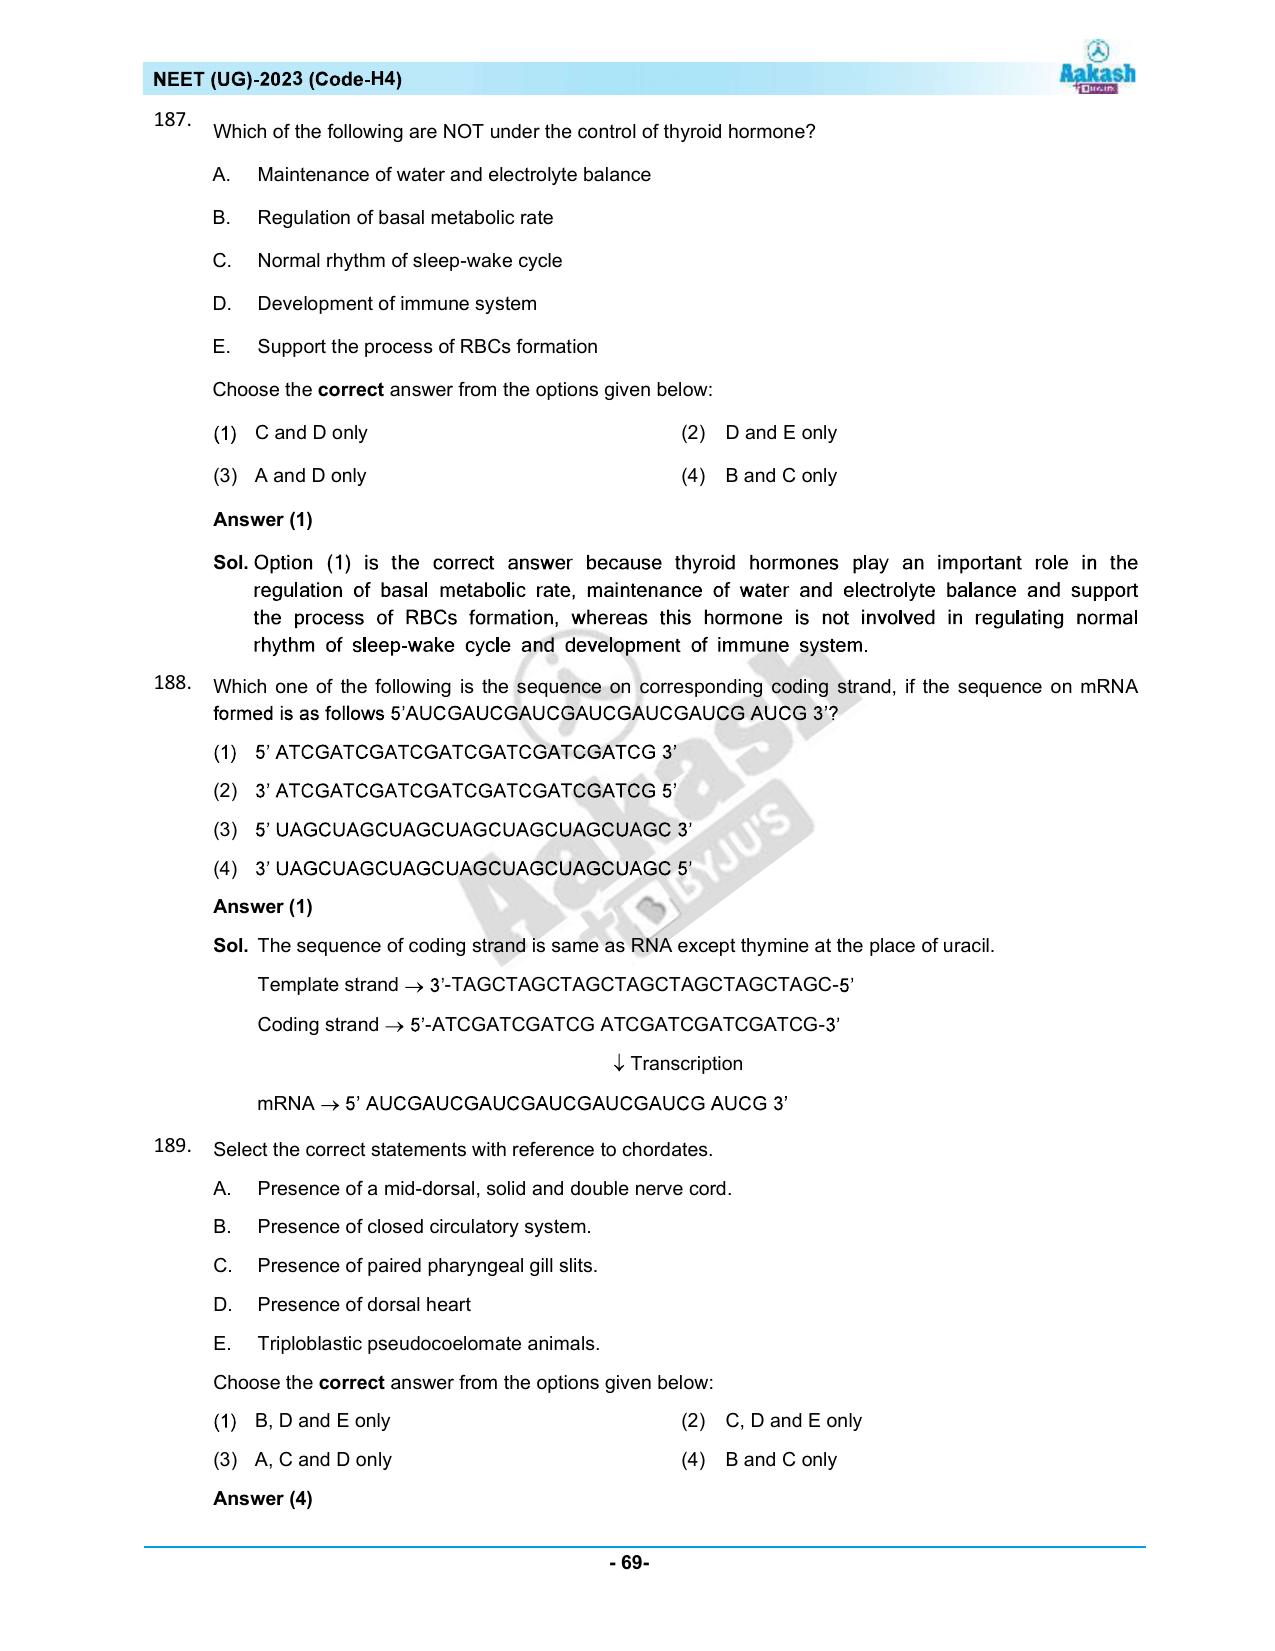 NEET 2023 Question Paper H4 - Page 69